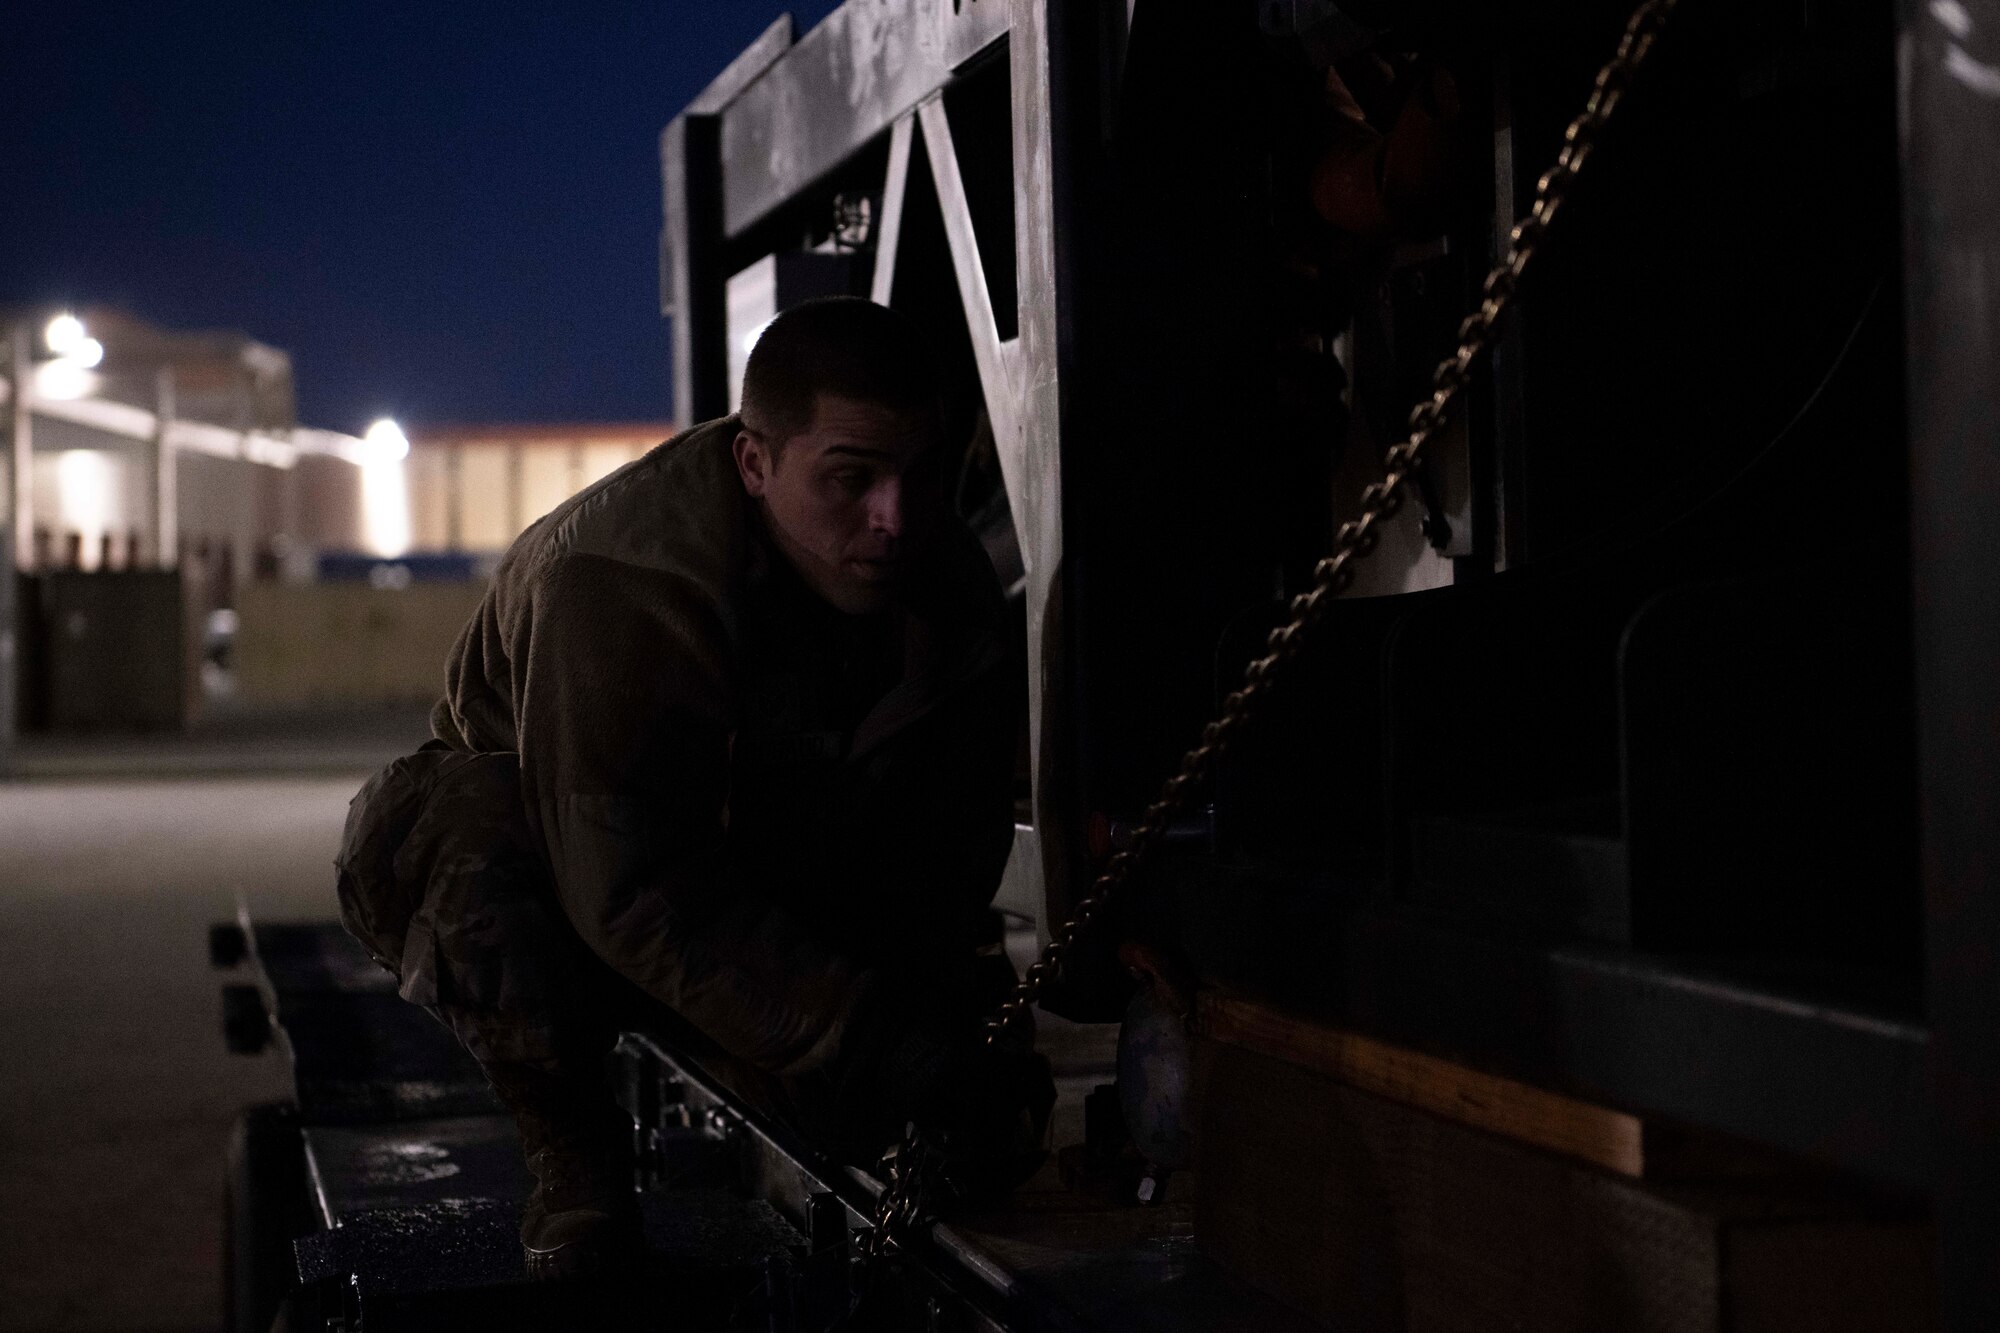 An Airman secures chain of cargo